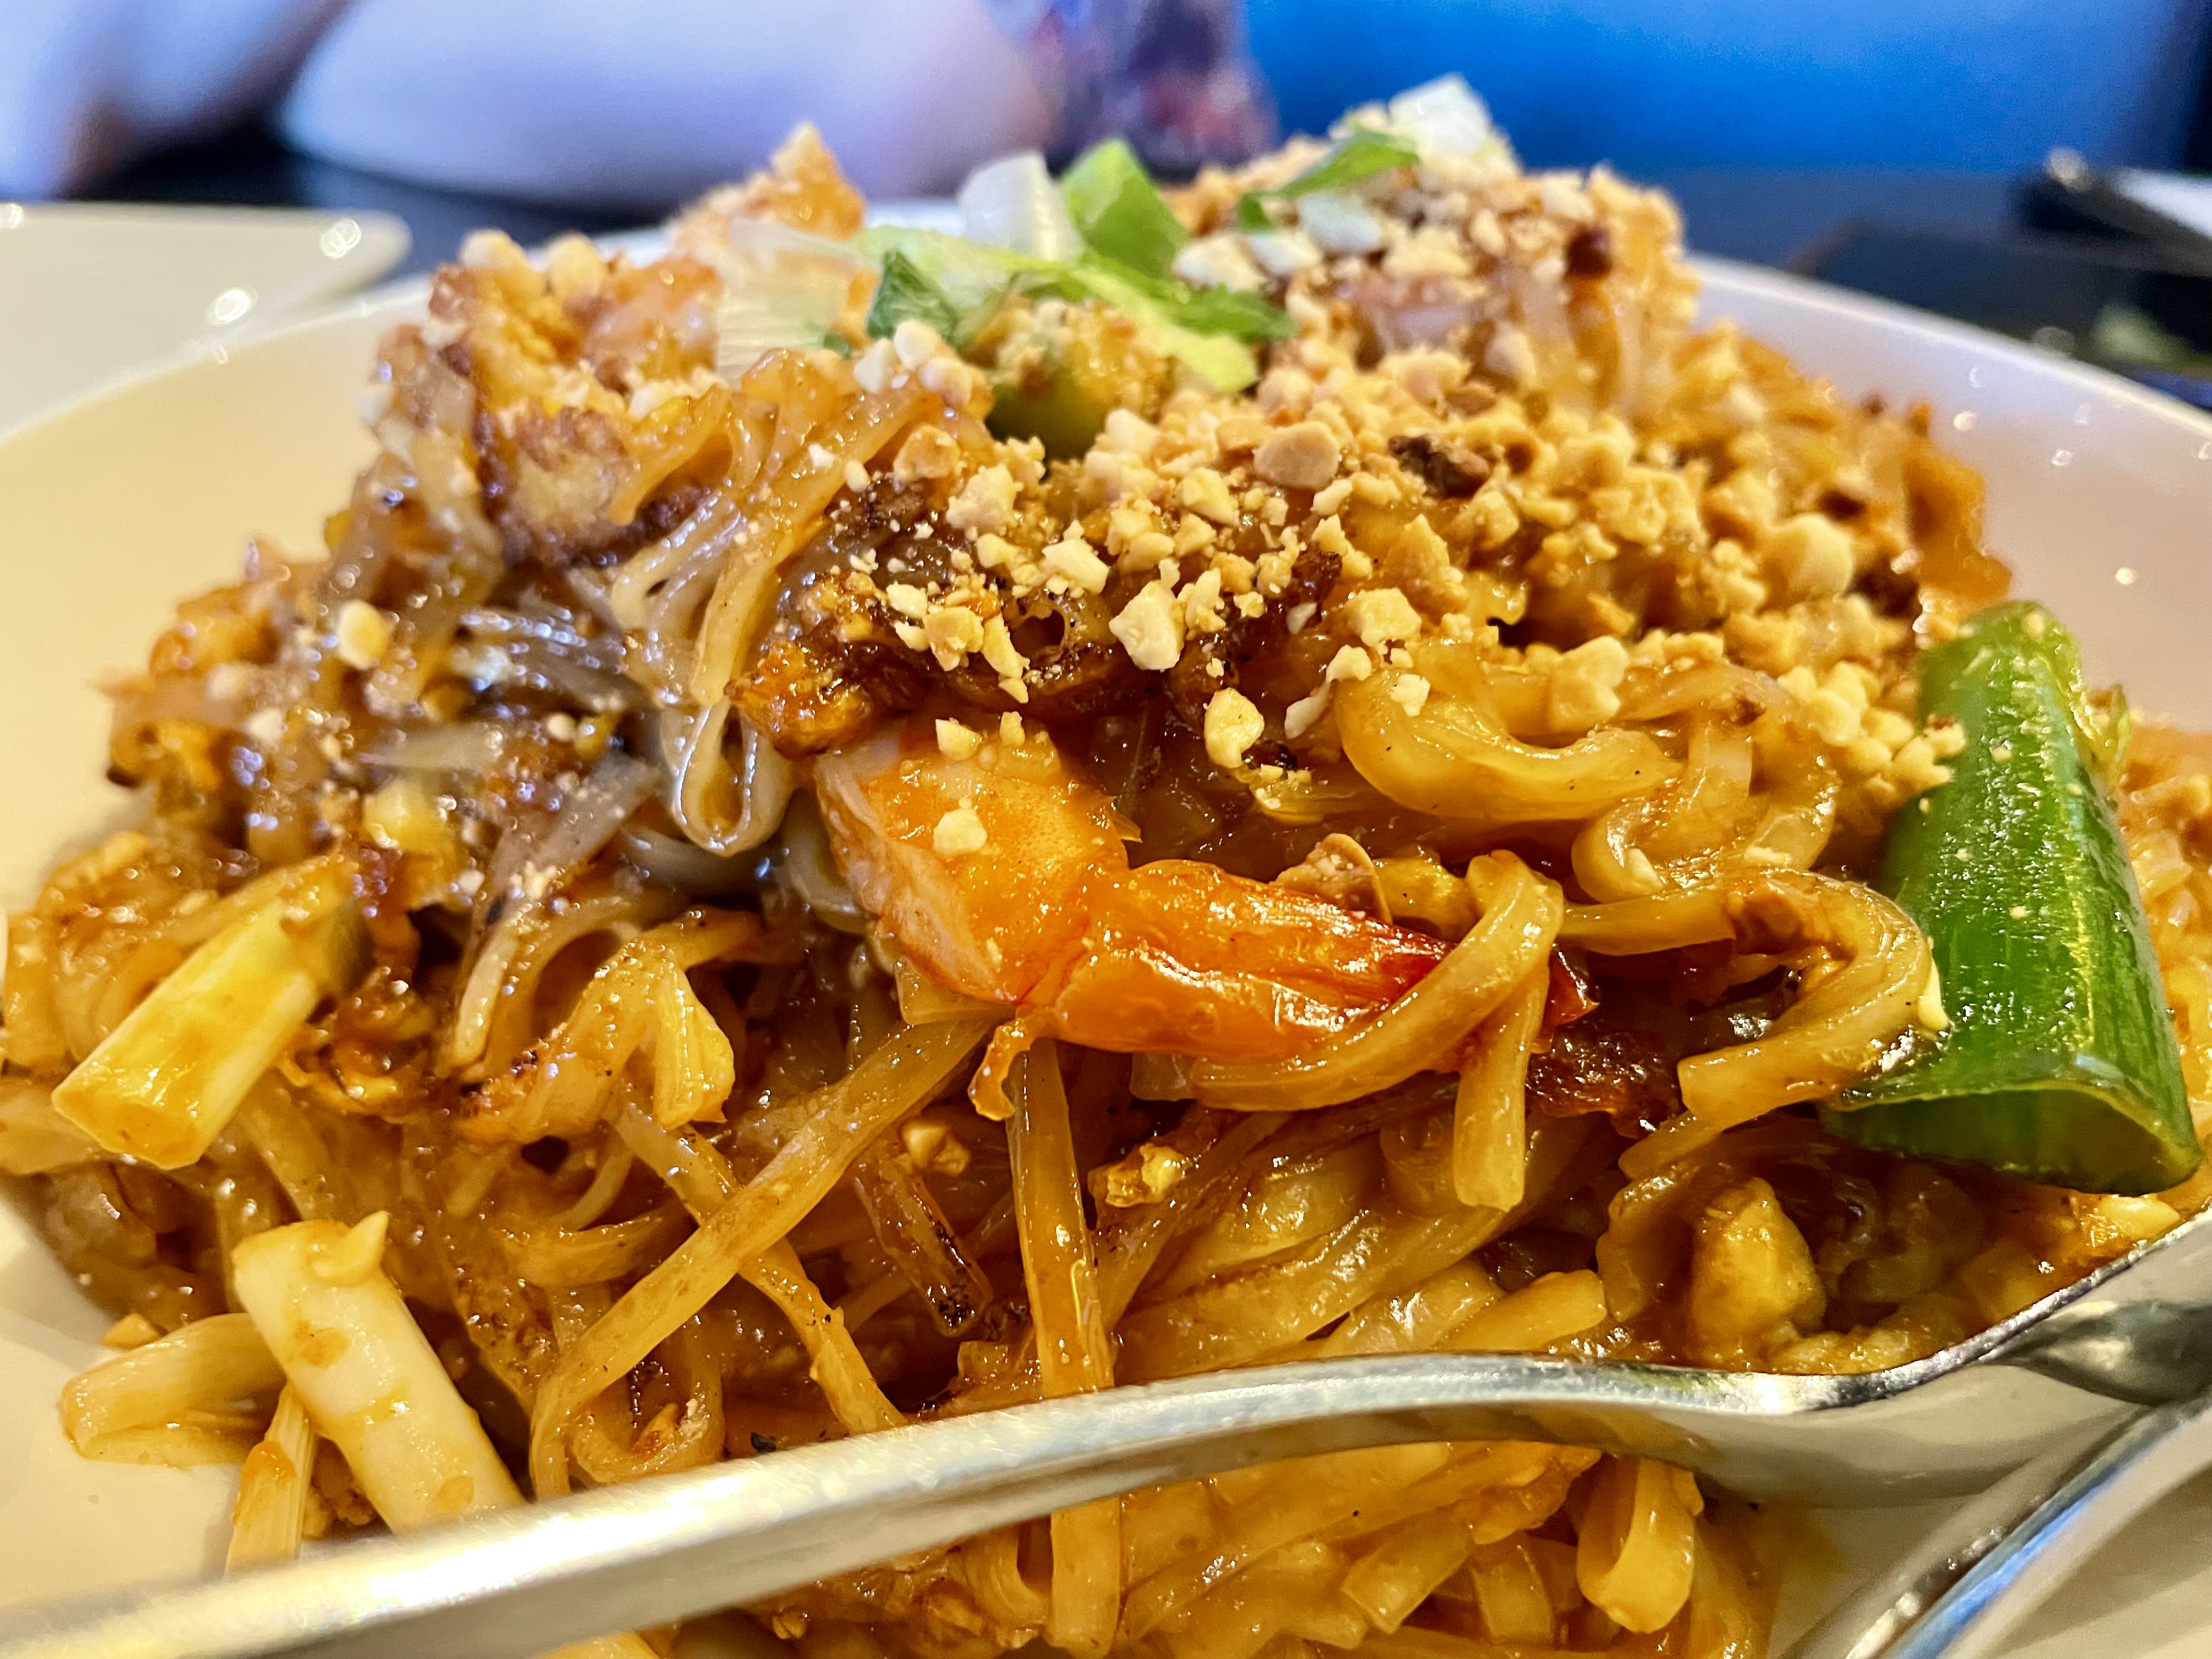 Pad thai is a rice noodle dish with stir-fried chicken, egg, bean sprouts, green onions and peanuts